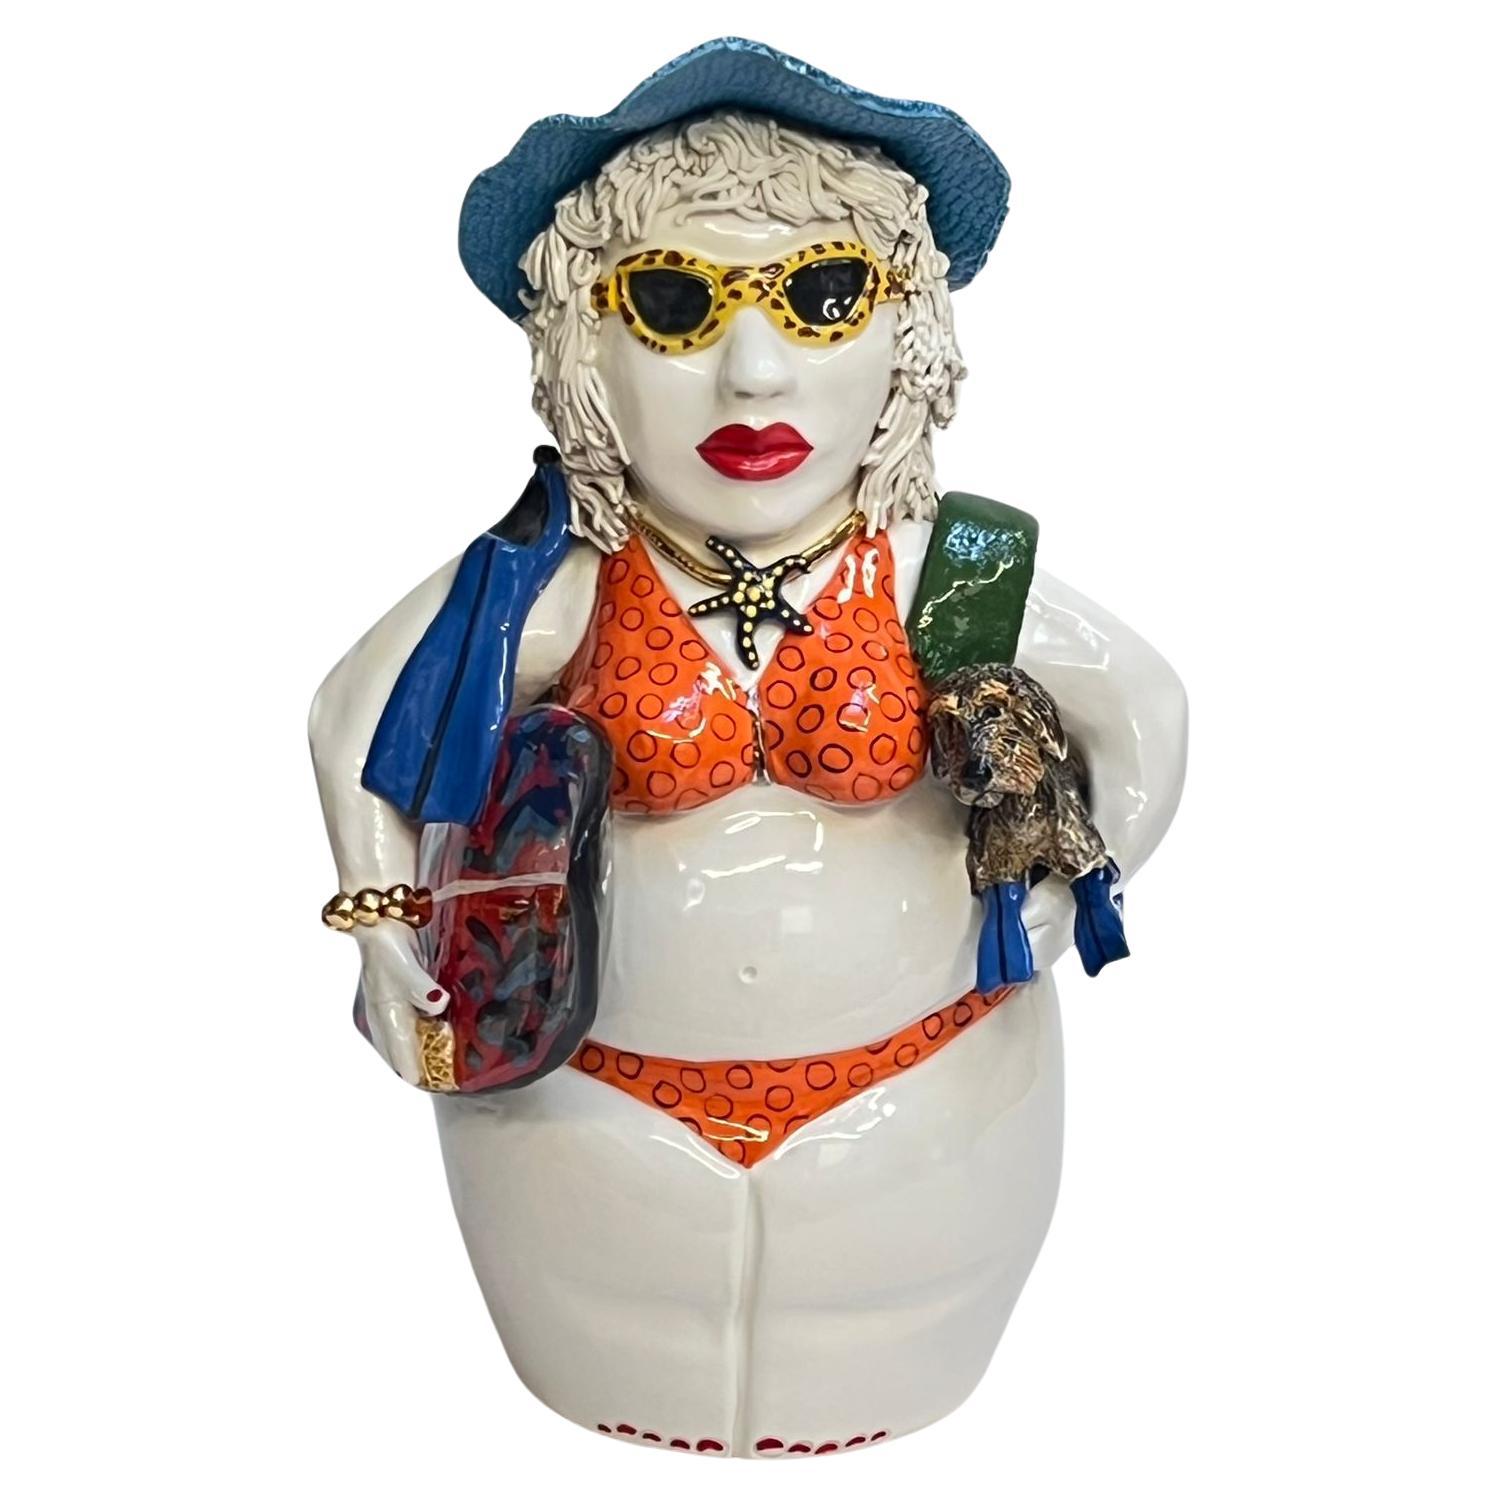 Swimming suit Woman, Going to the beach in summer. Handmade with no mold. Italy